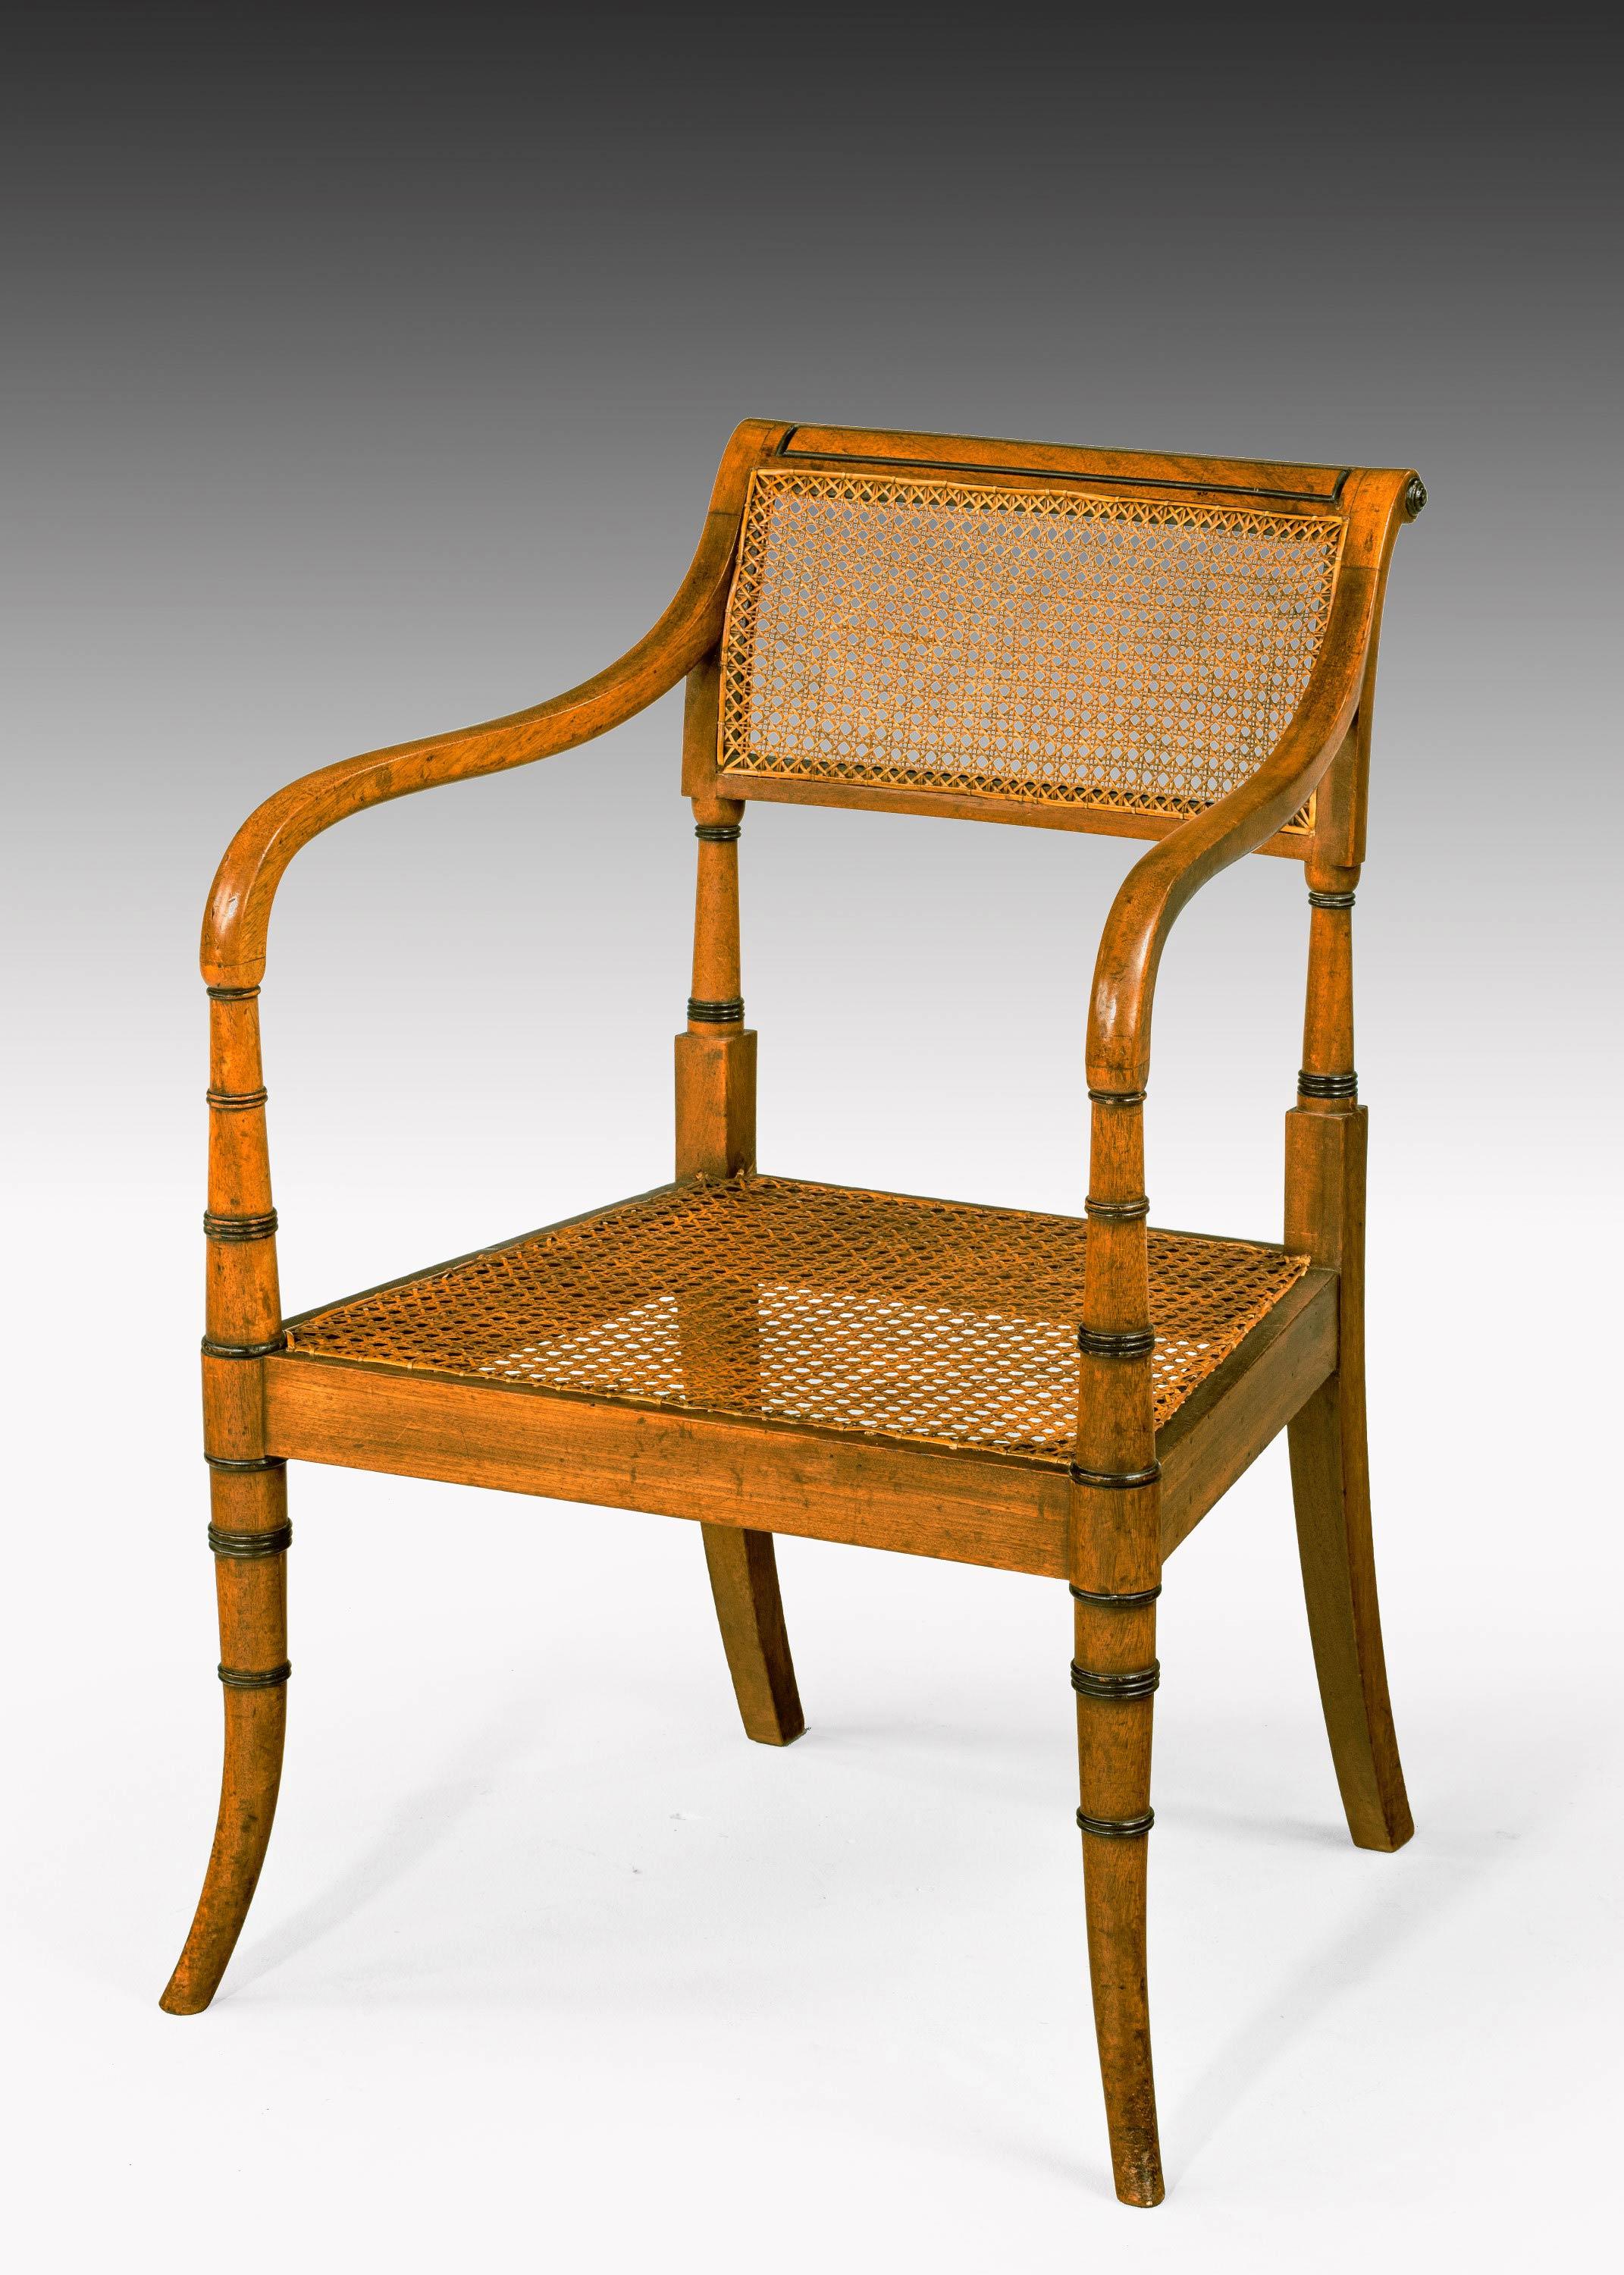 An unusual and variacant suite of eight Regency period mahogany chairs. Consisting of four elbow chairs and four singles. With fine period caning. The supports with an unusual flare to the bottom section and ebonised ring turnings. 

Seat height